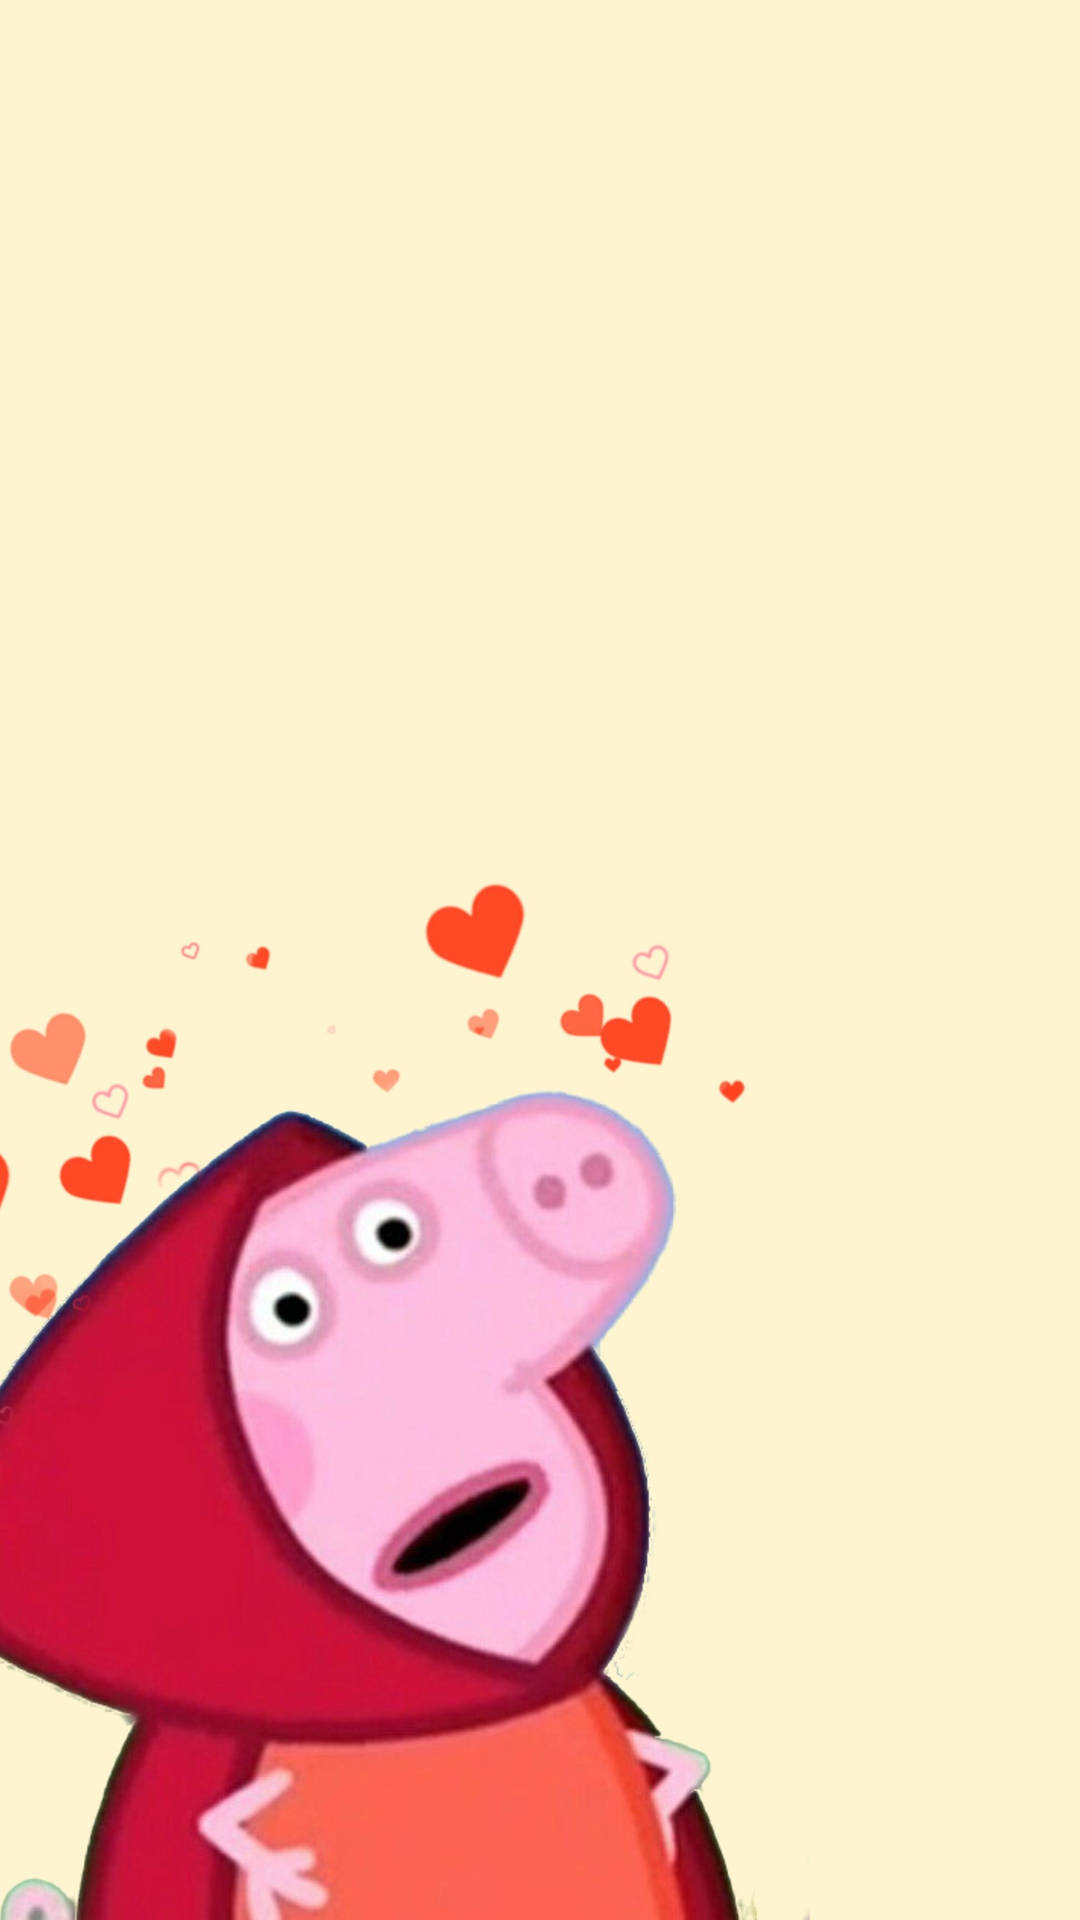 Peppa Pig In Red Hood With Hearts Wallpaper